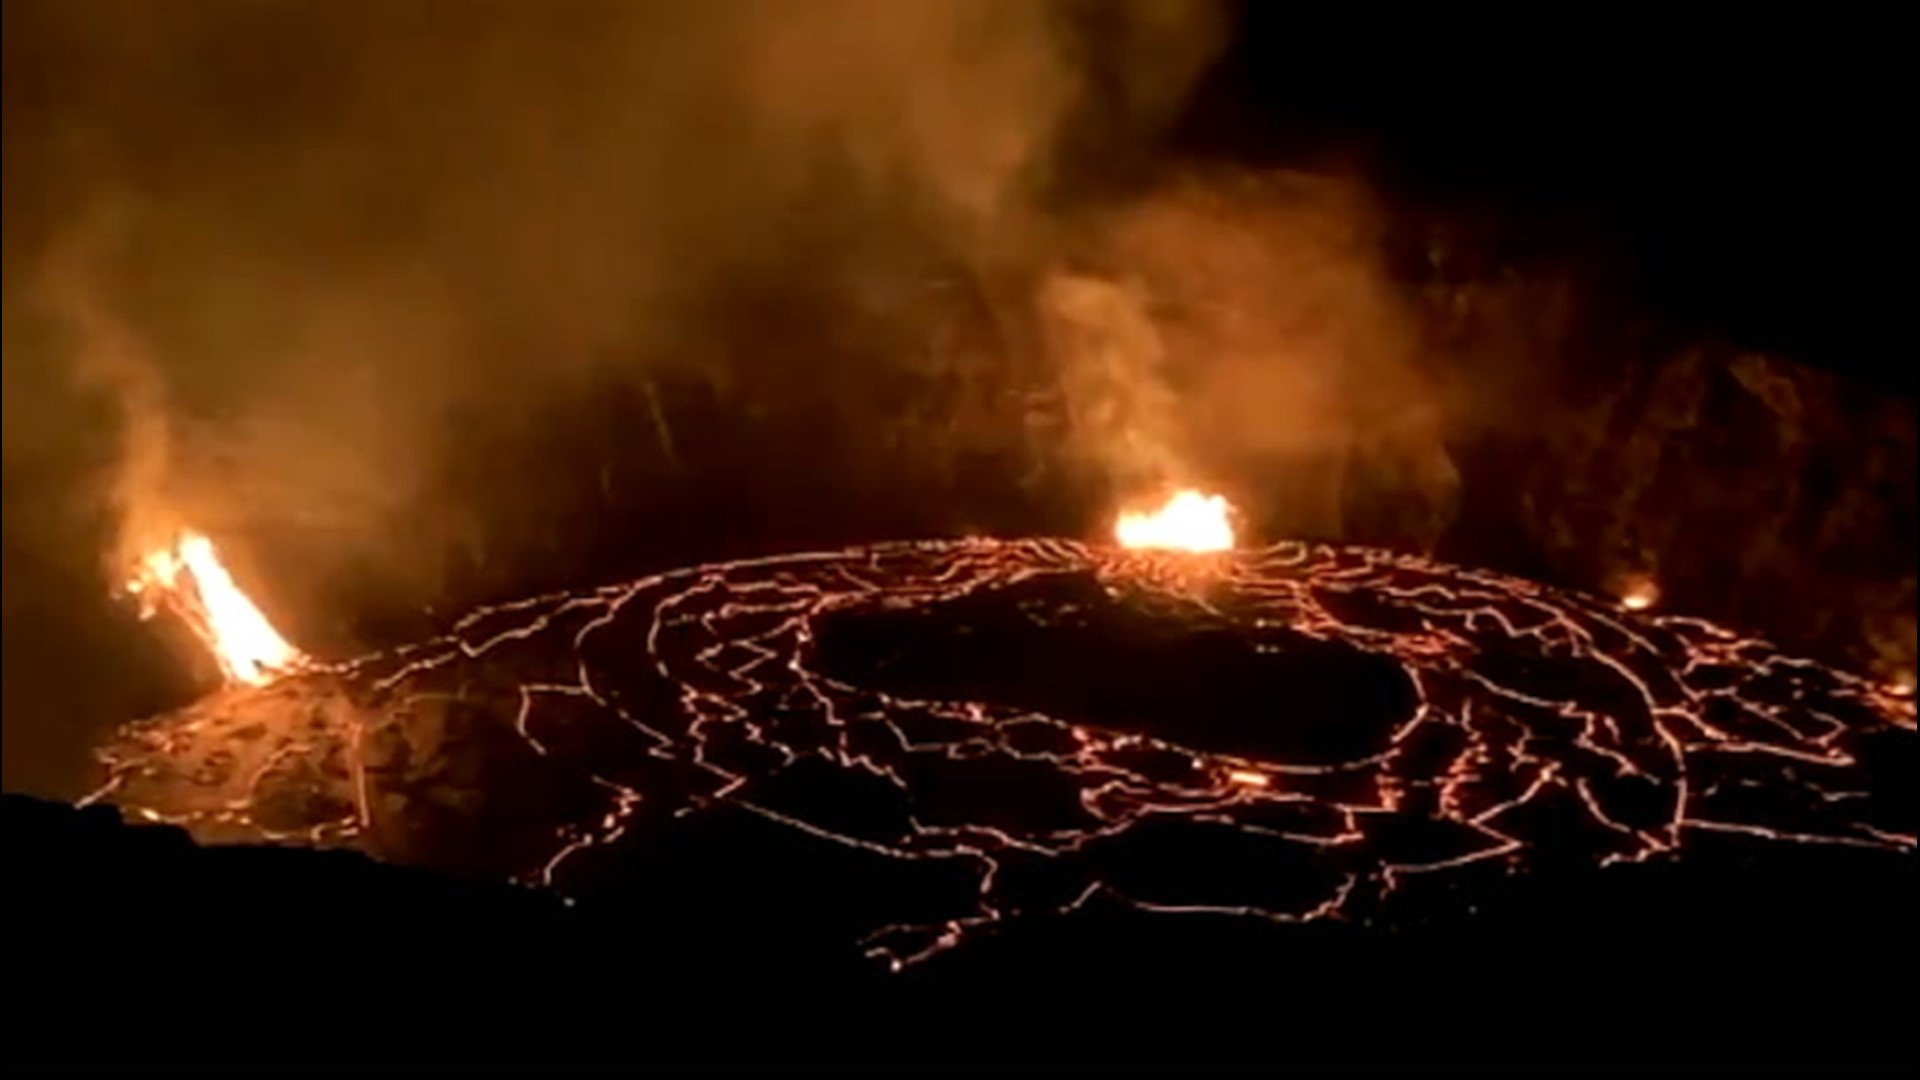 Continuous lava flows from Kilauea formed a lake in the volcano's crater on Dec. 26. The volcano erupted on Dec. 20.